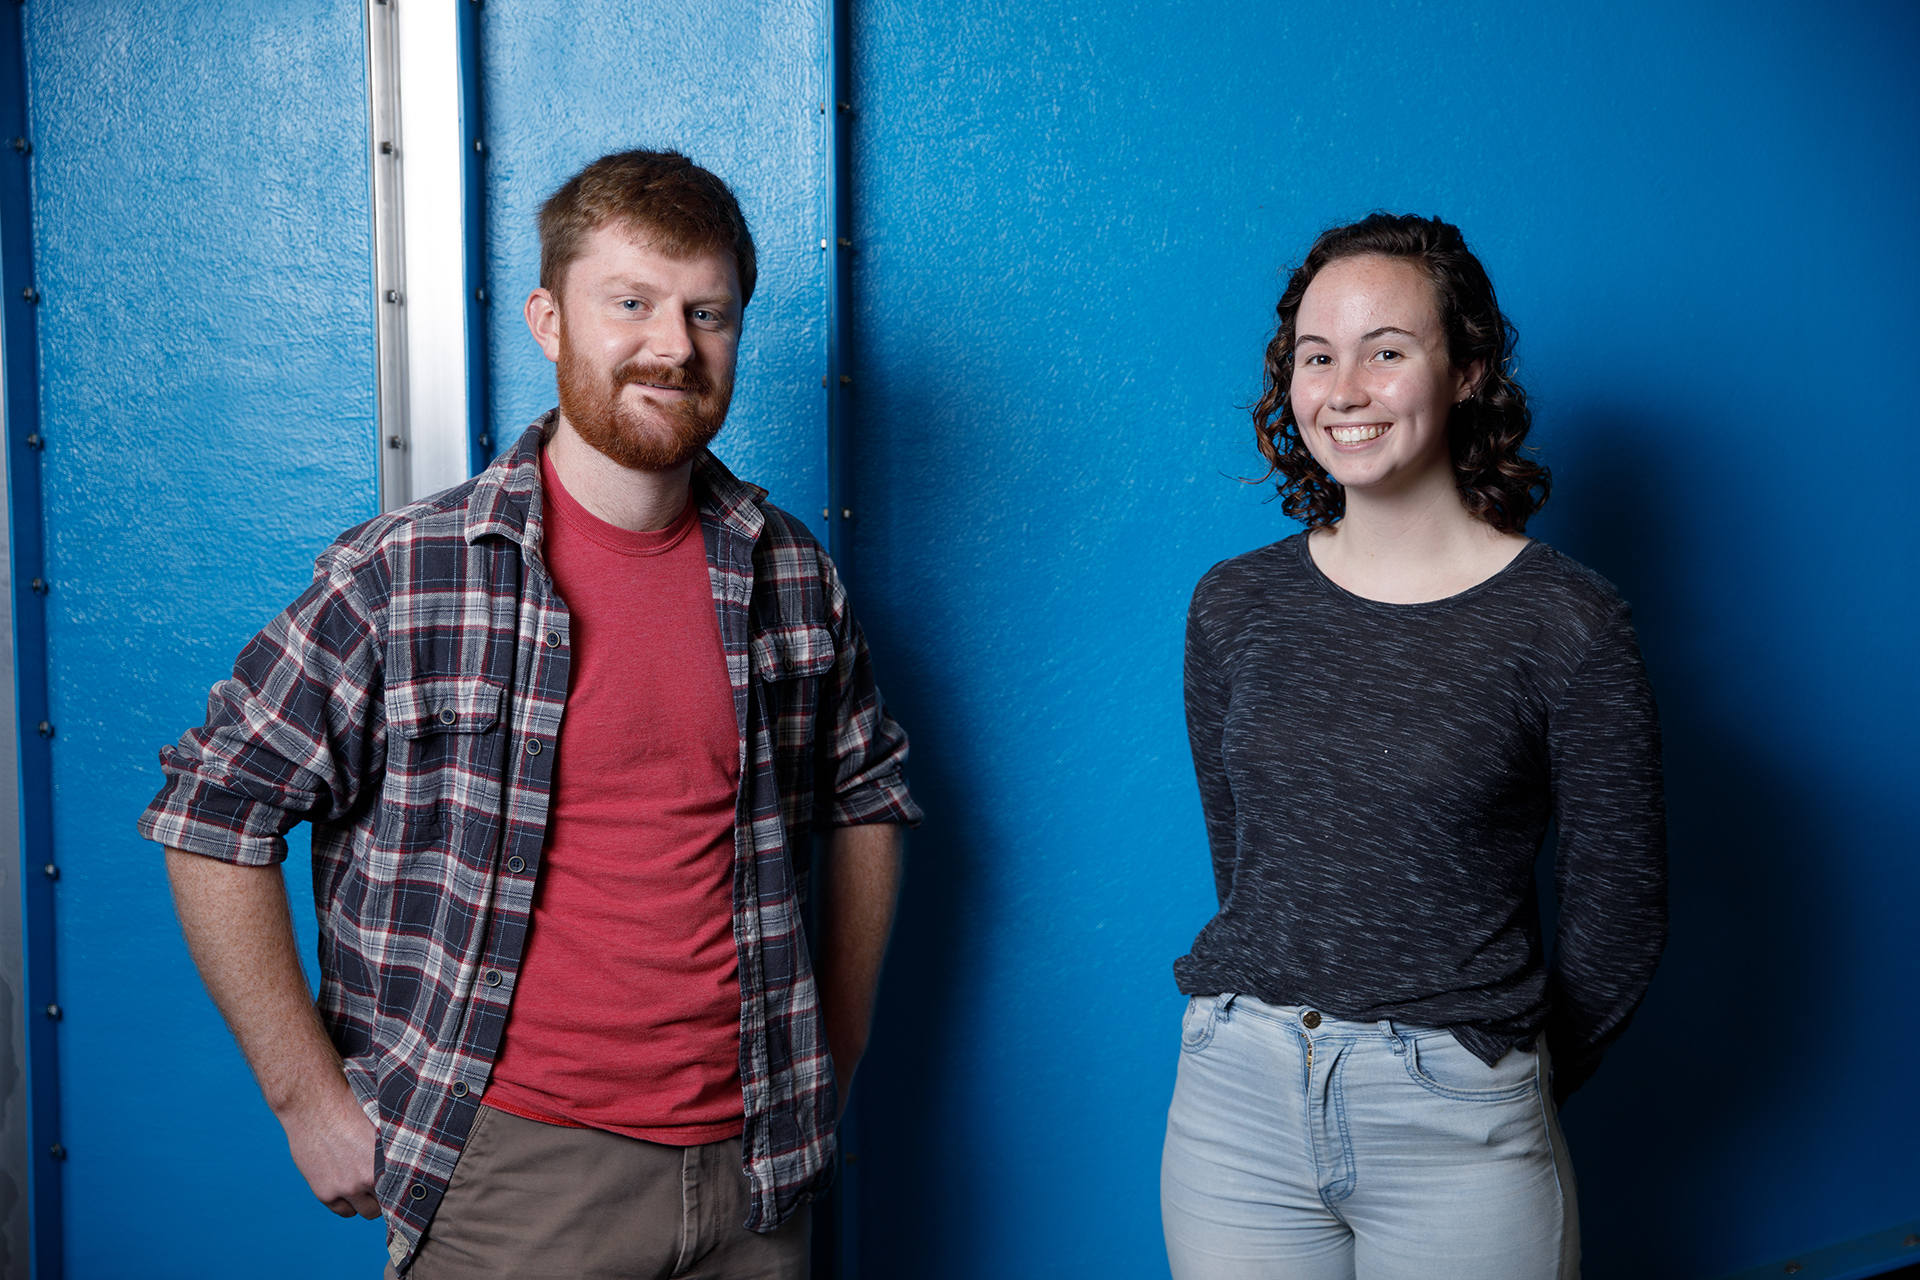 Engineering students stand in front of a blue wall.